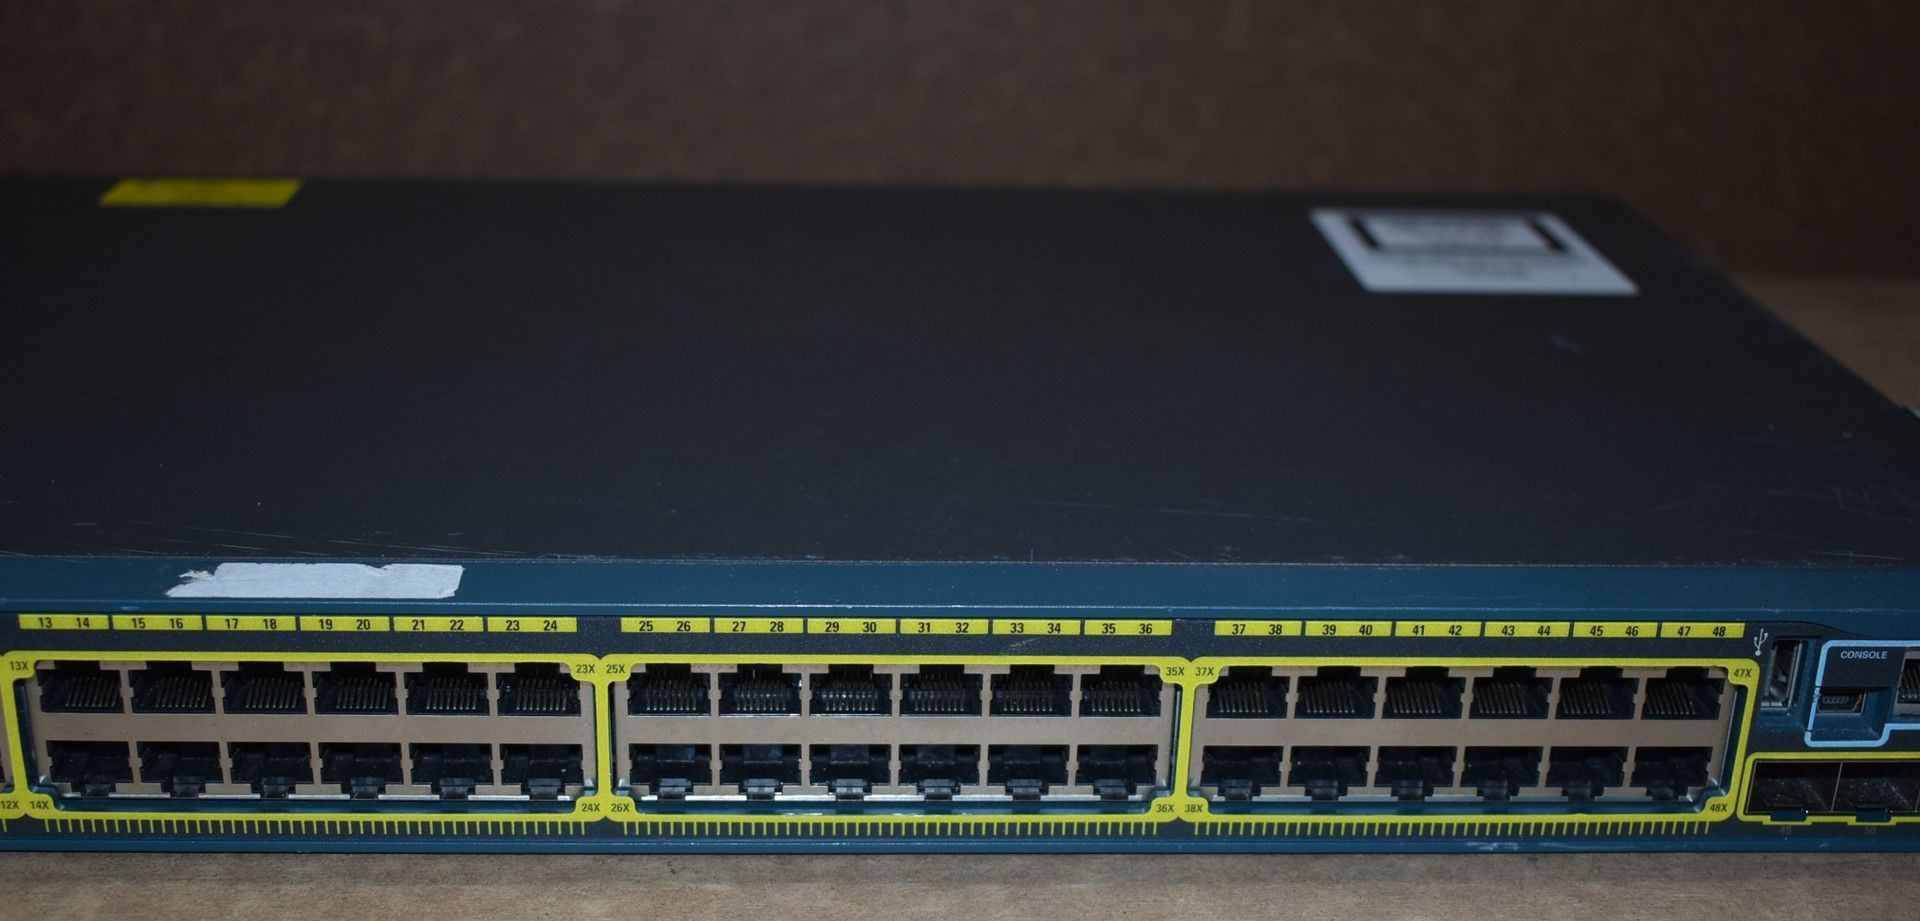 1 x Cisco Catalyst 2960S 48 Port Switch - Includes Power Cable - Ref: MPC114 CA - CL678 - - Image 3 of 6